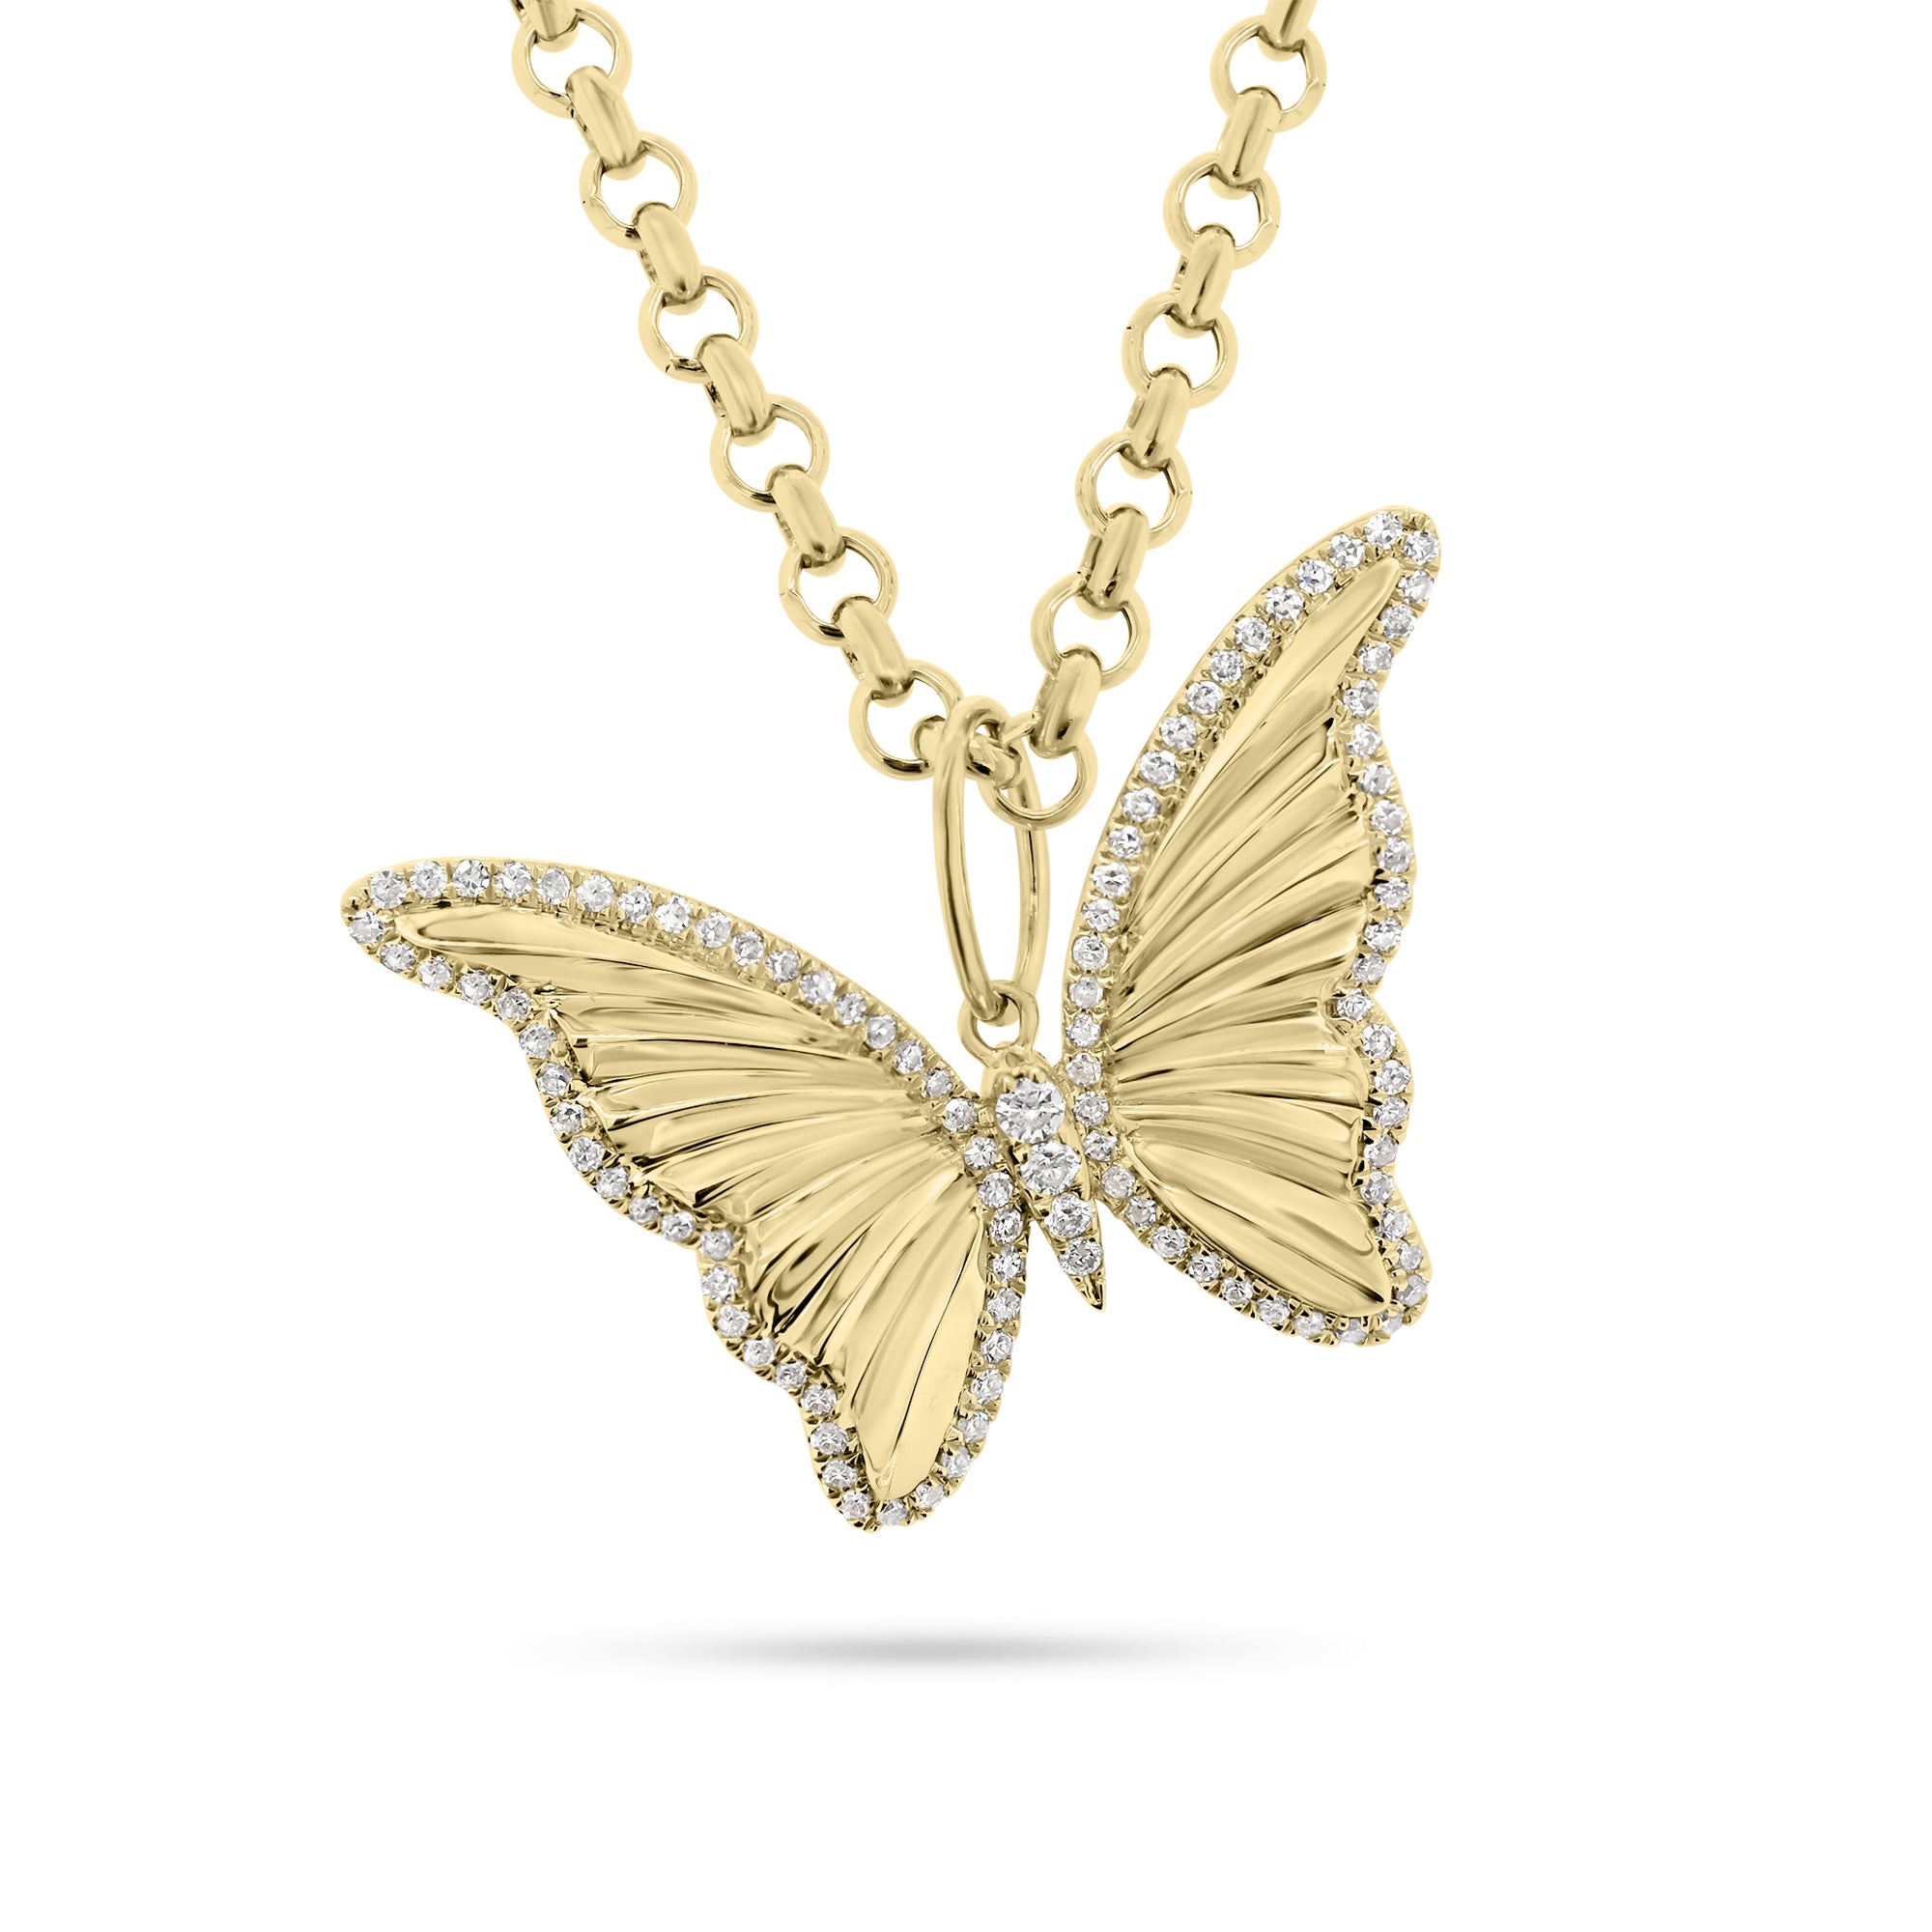 Diamond Butterfly Pendant - 14K yellow gold weighing 3.81 grams  - 102 round diamonds totaling 0.31 carats